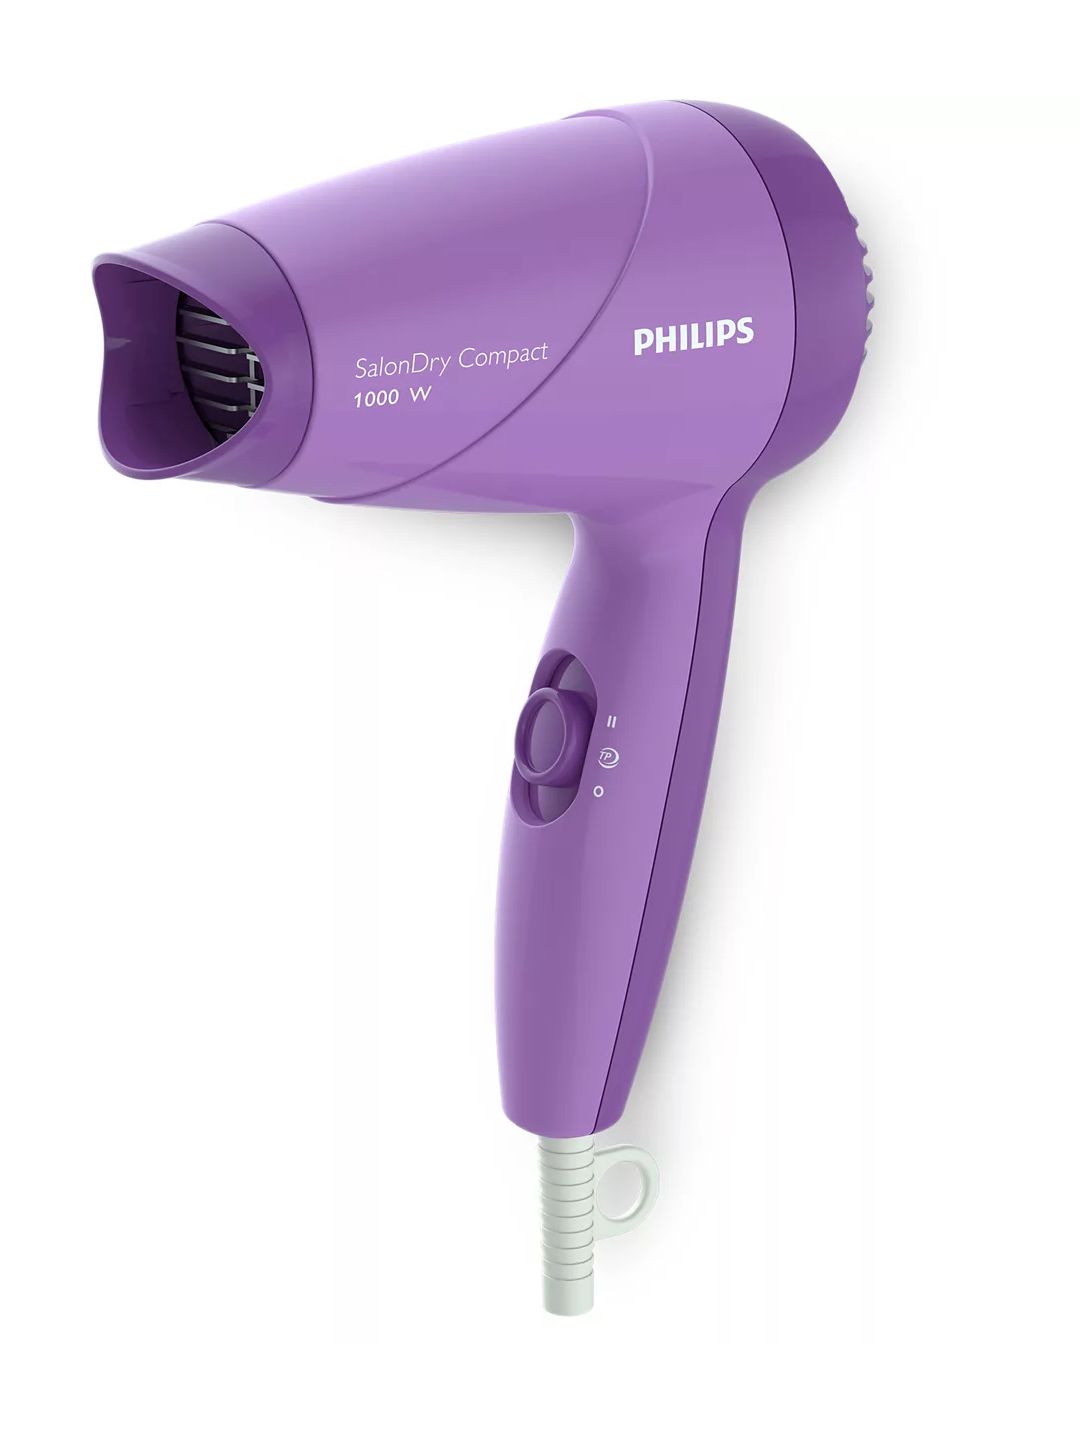 Philips HP8100/46 SalonDry ThermoProtect 1000W Compact Hair Dryer - Purple Price in India